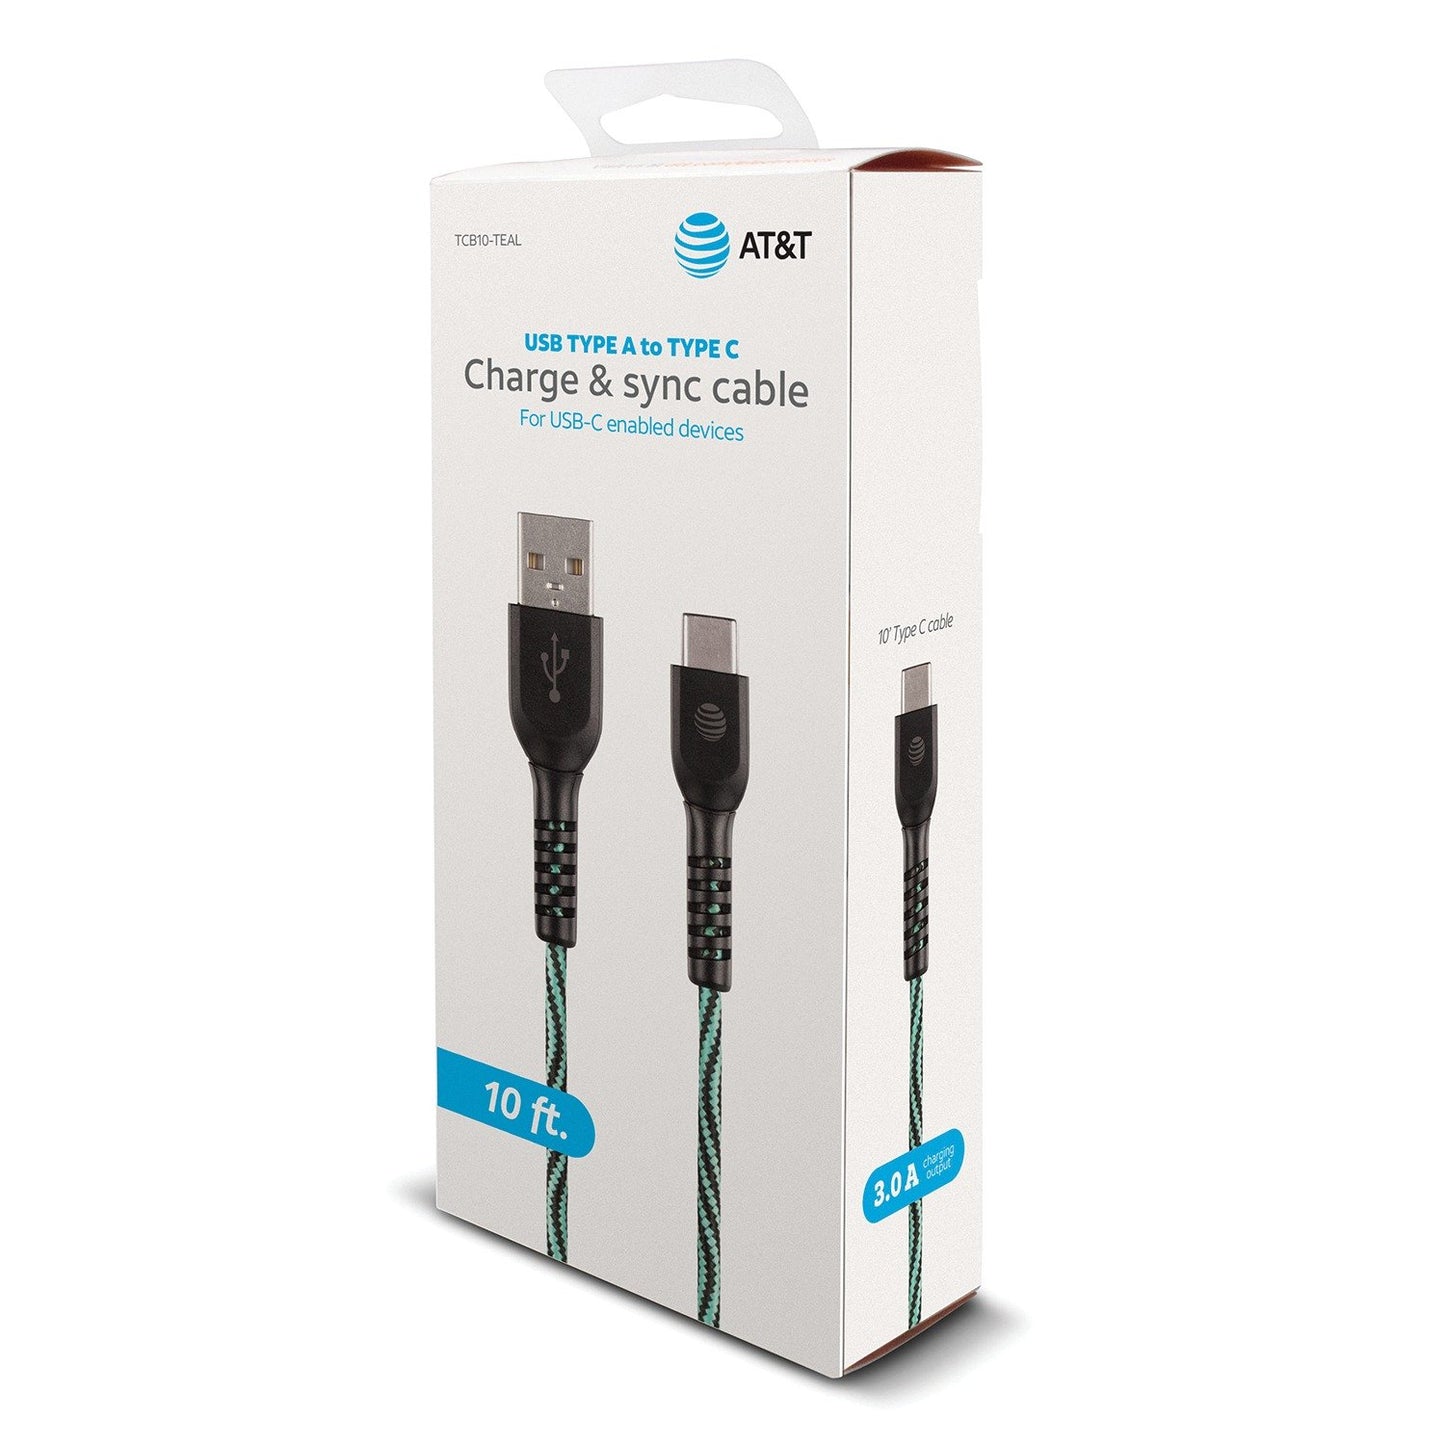 AT&T  TCB10-TEAL 10-Foot Charge and Sync USB - Type-C Cable (Green)